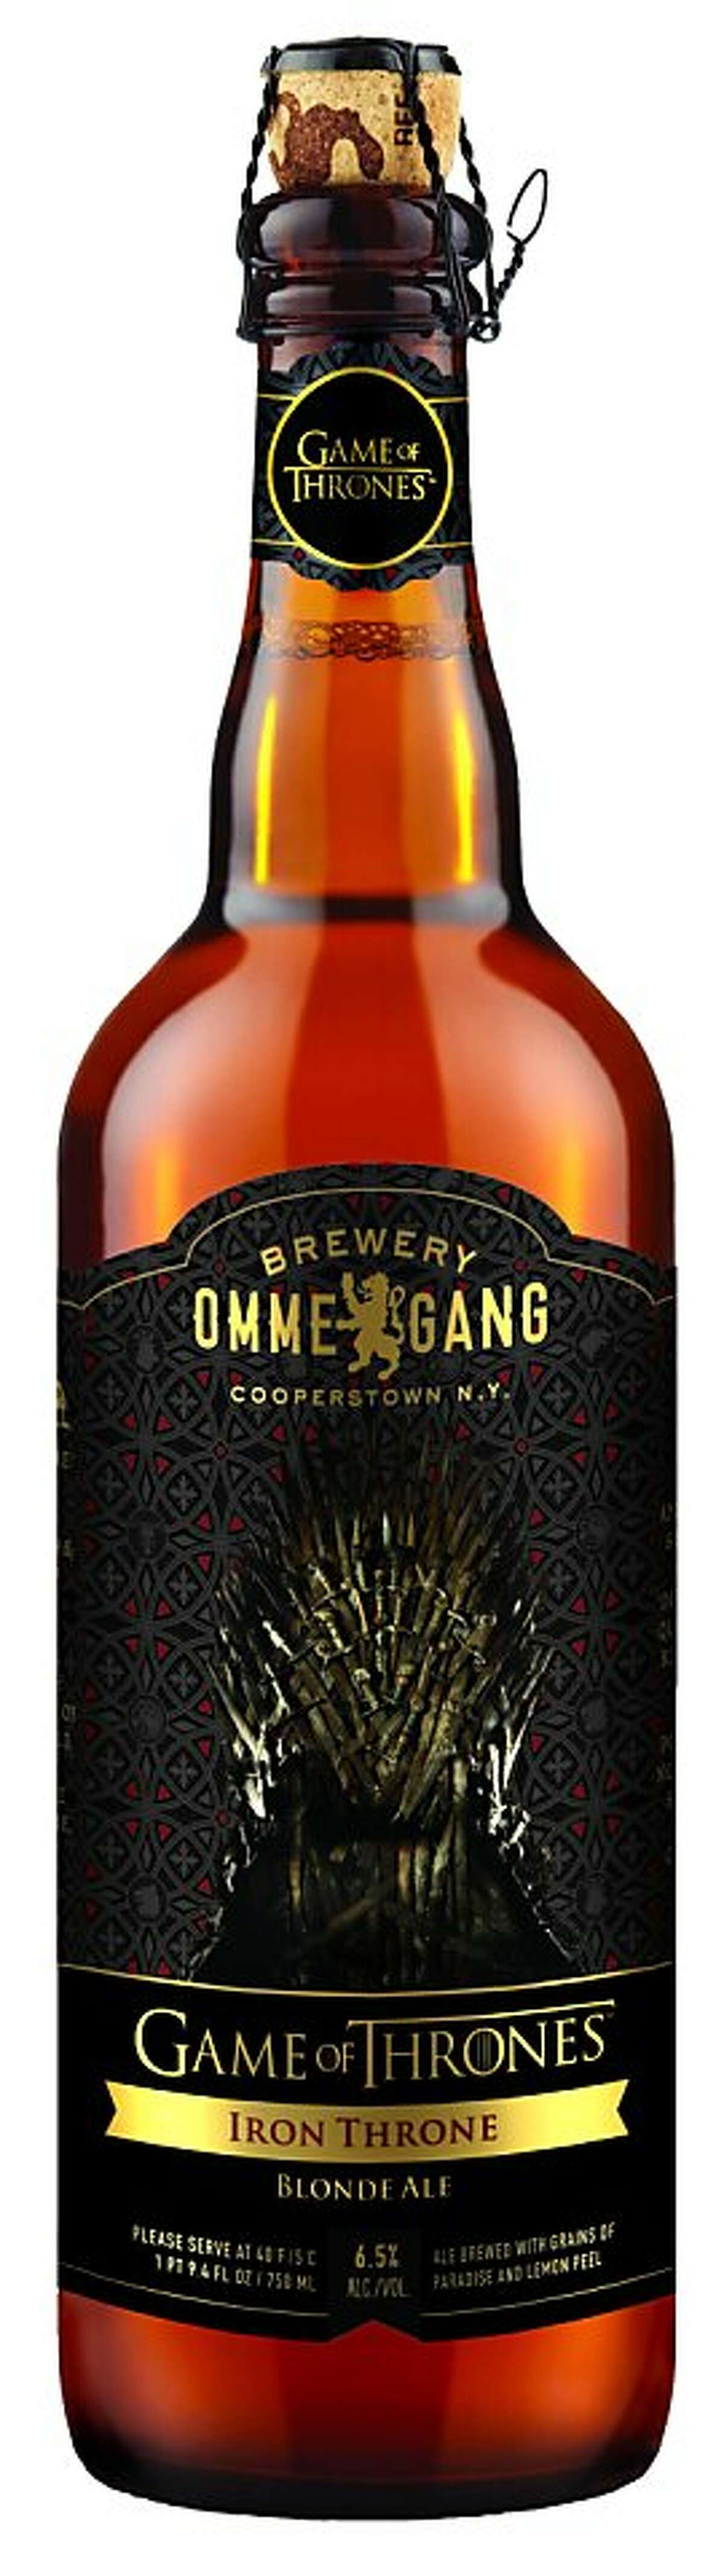 Iron Throne Blonde Ale from Ommegang.